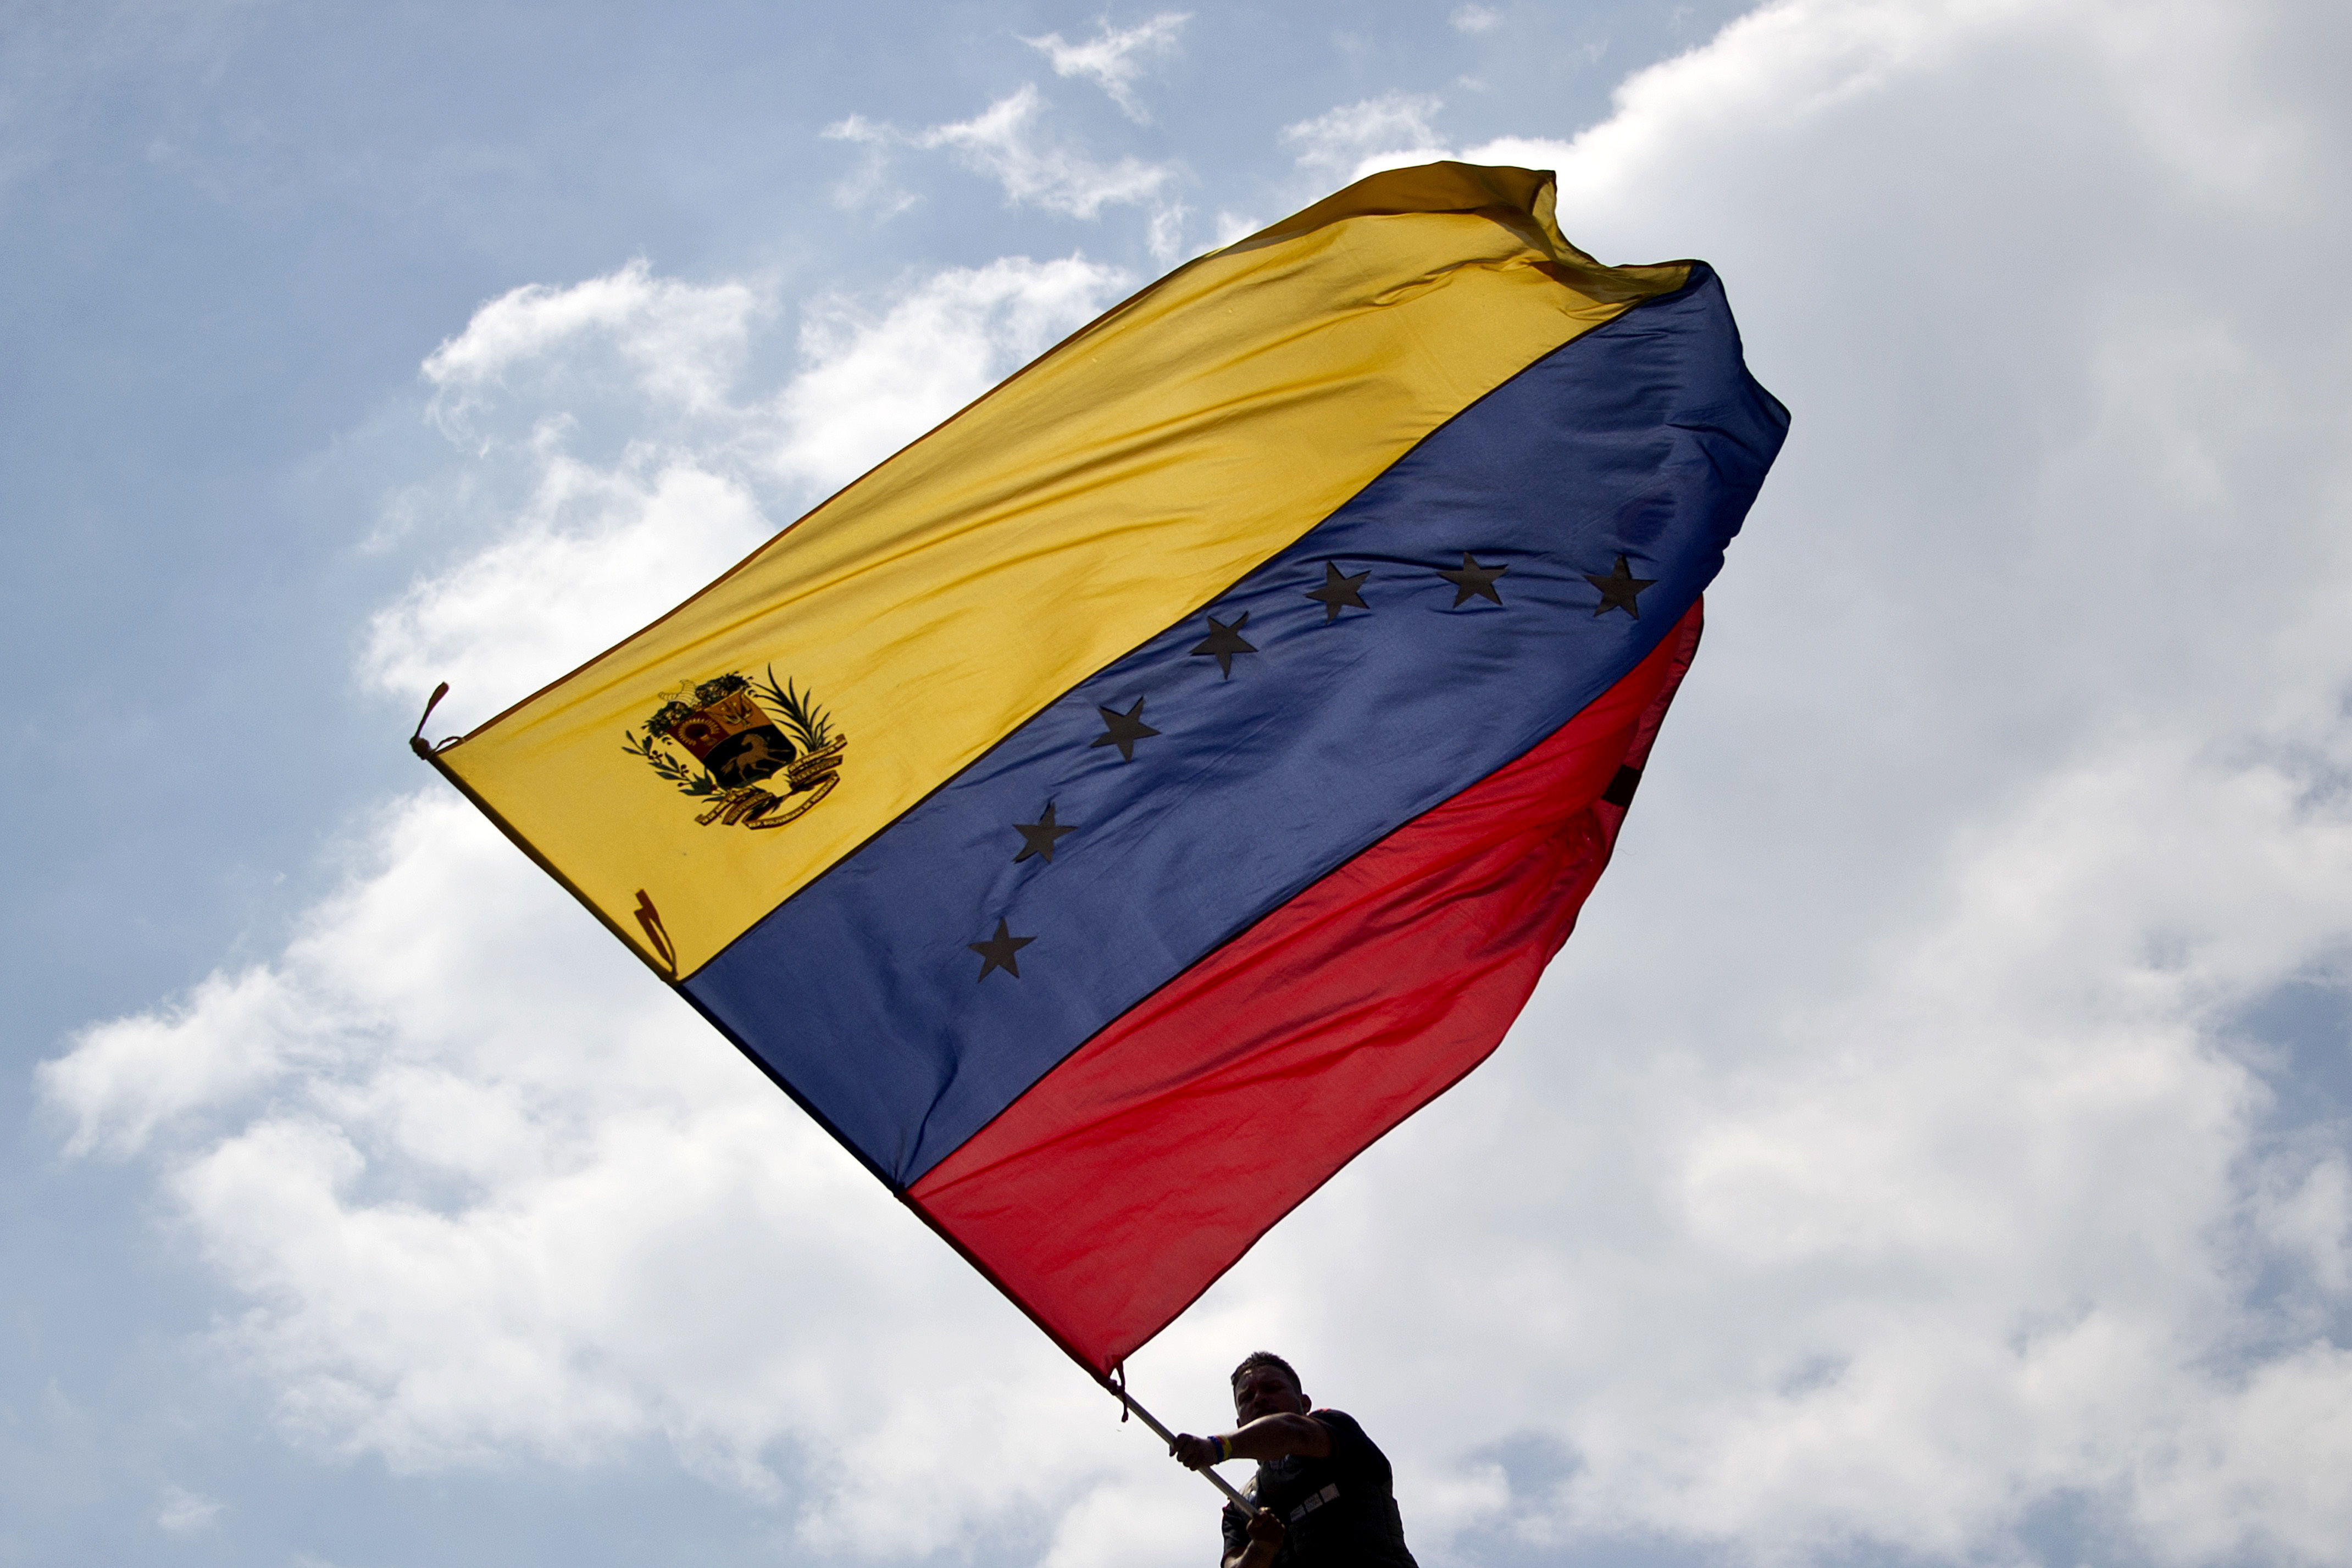 A man waves a Venezuelan flag during a protest against the government of President Nicolas Maduro in San Cristobal, Venezuela, on Feb. 22, 2014. (Luis Robayo—Getty Images)